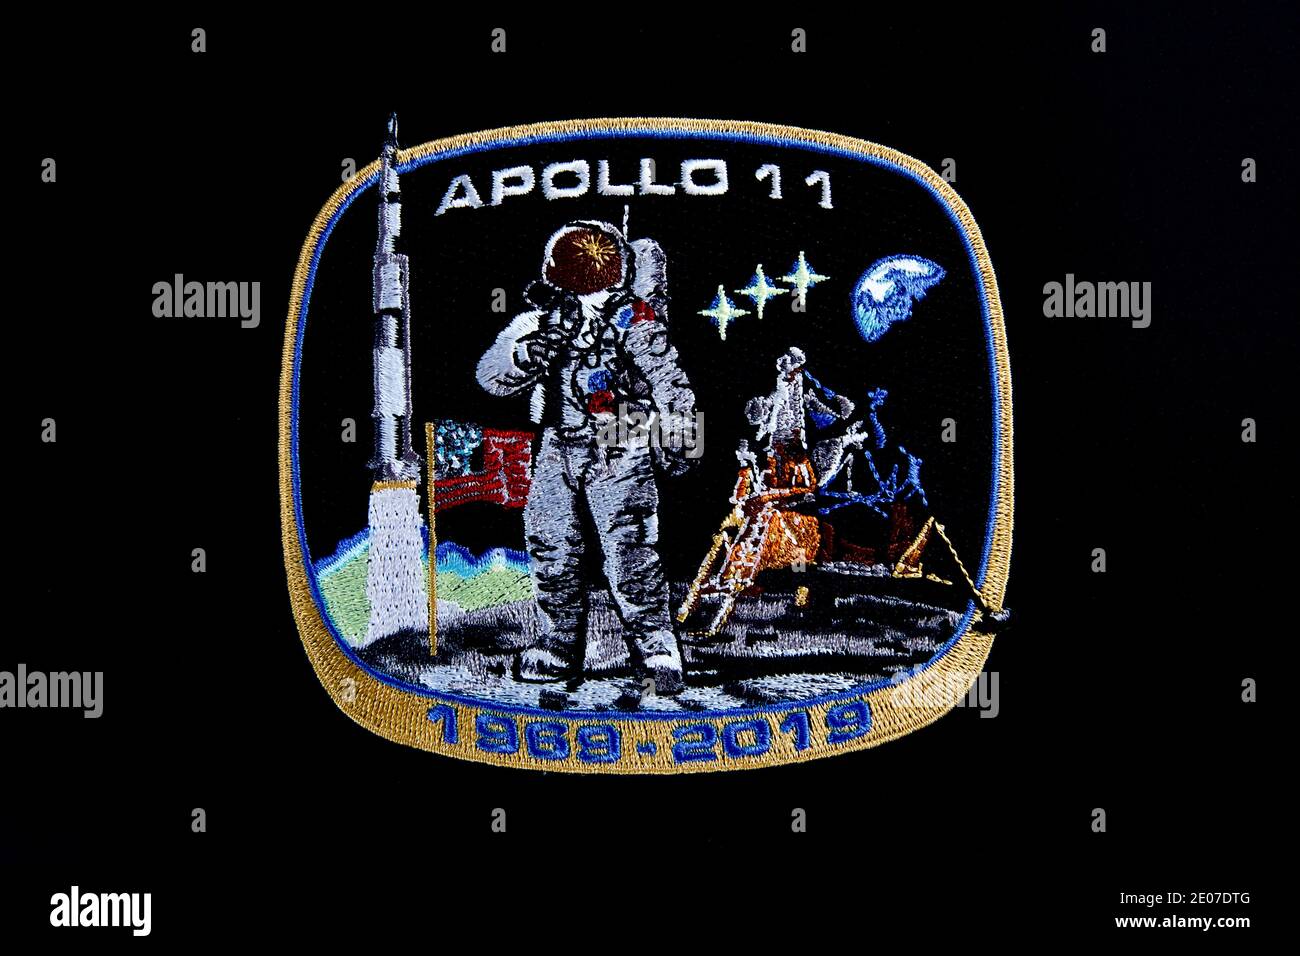 NASA Apollo 11 Commemorative 1969-2019 Limited Edition Patch designed by well known patch artist Luc van den Abeelen Stock Photo